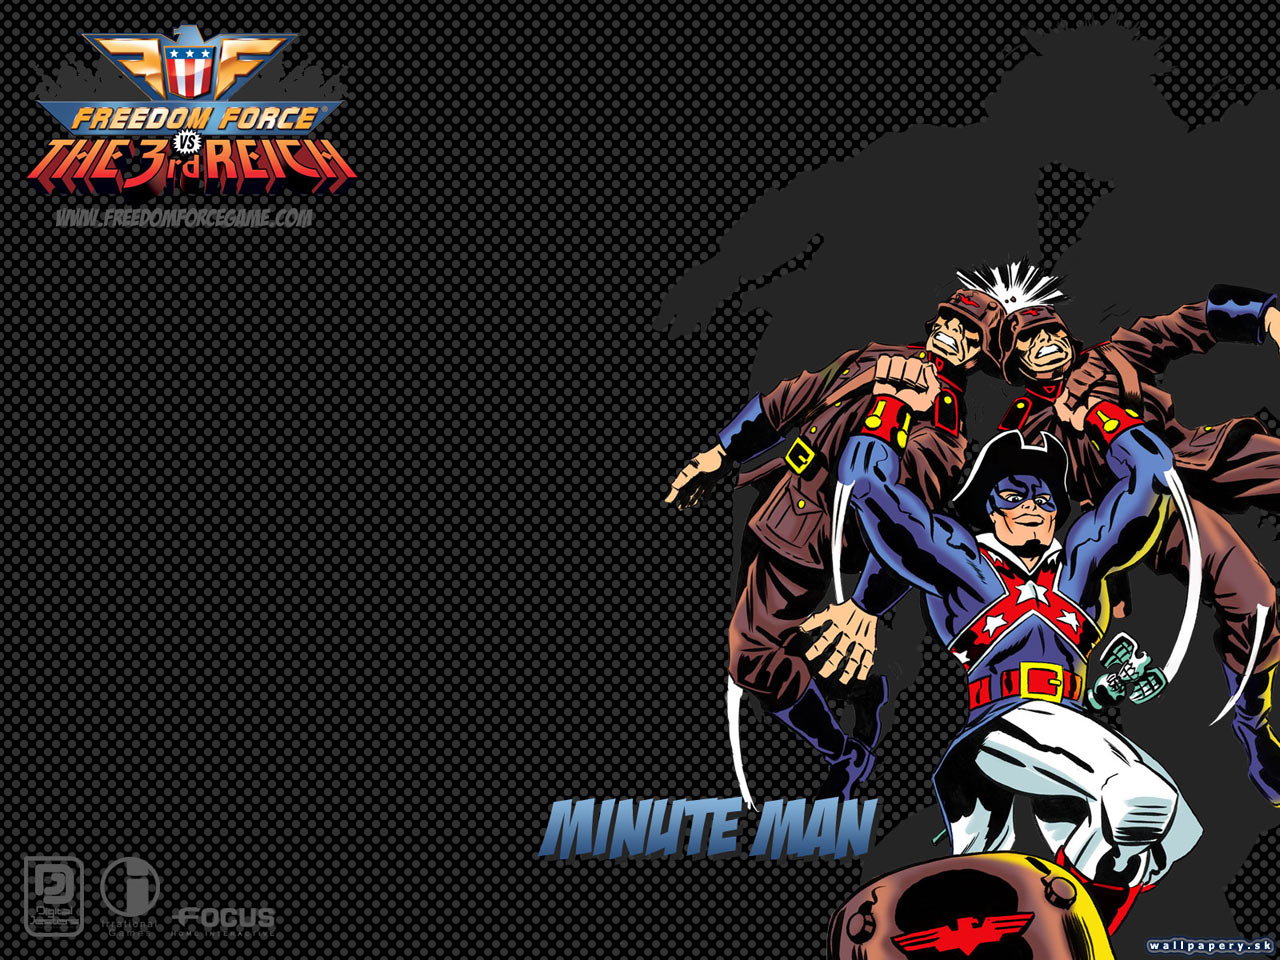 Freedom Force vs. Third Reich - wallpaper 6